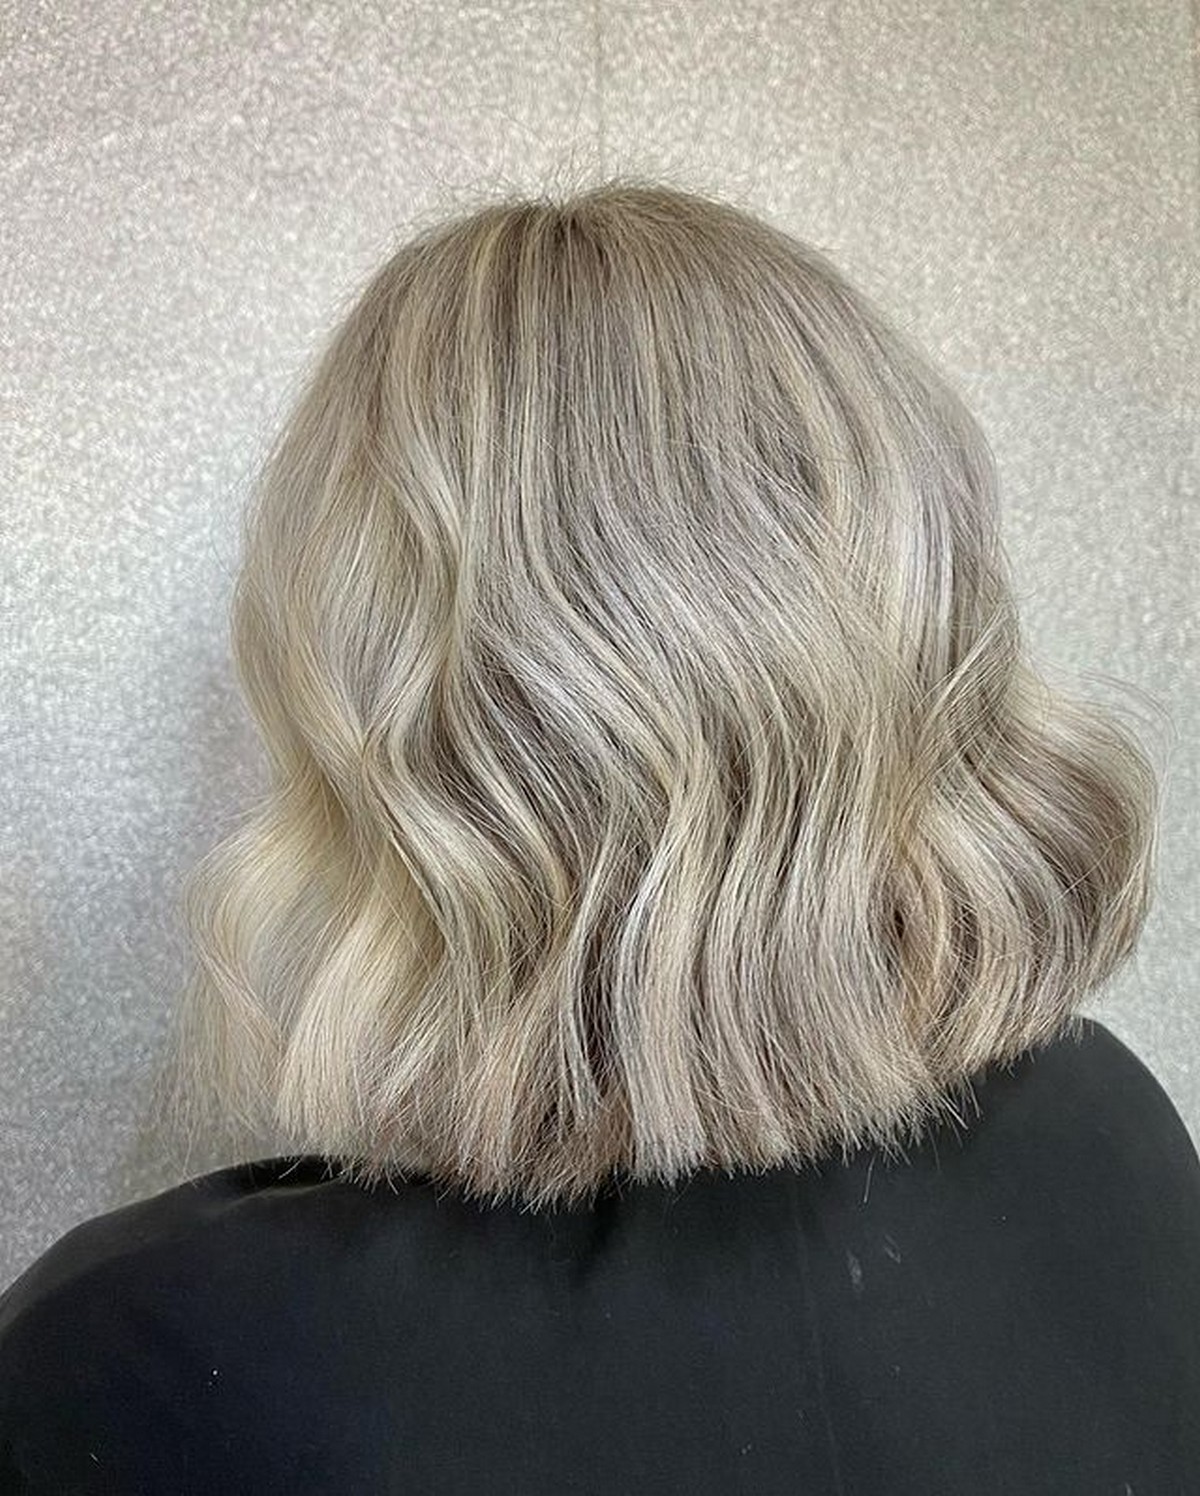 Tousled Beachy Waves With Blonde Highlights